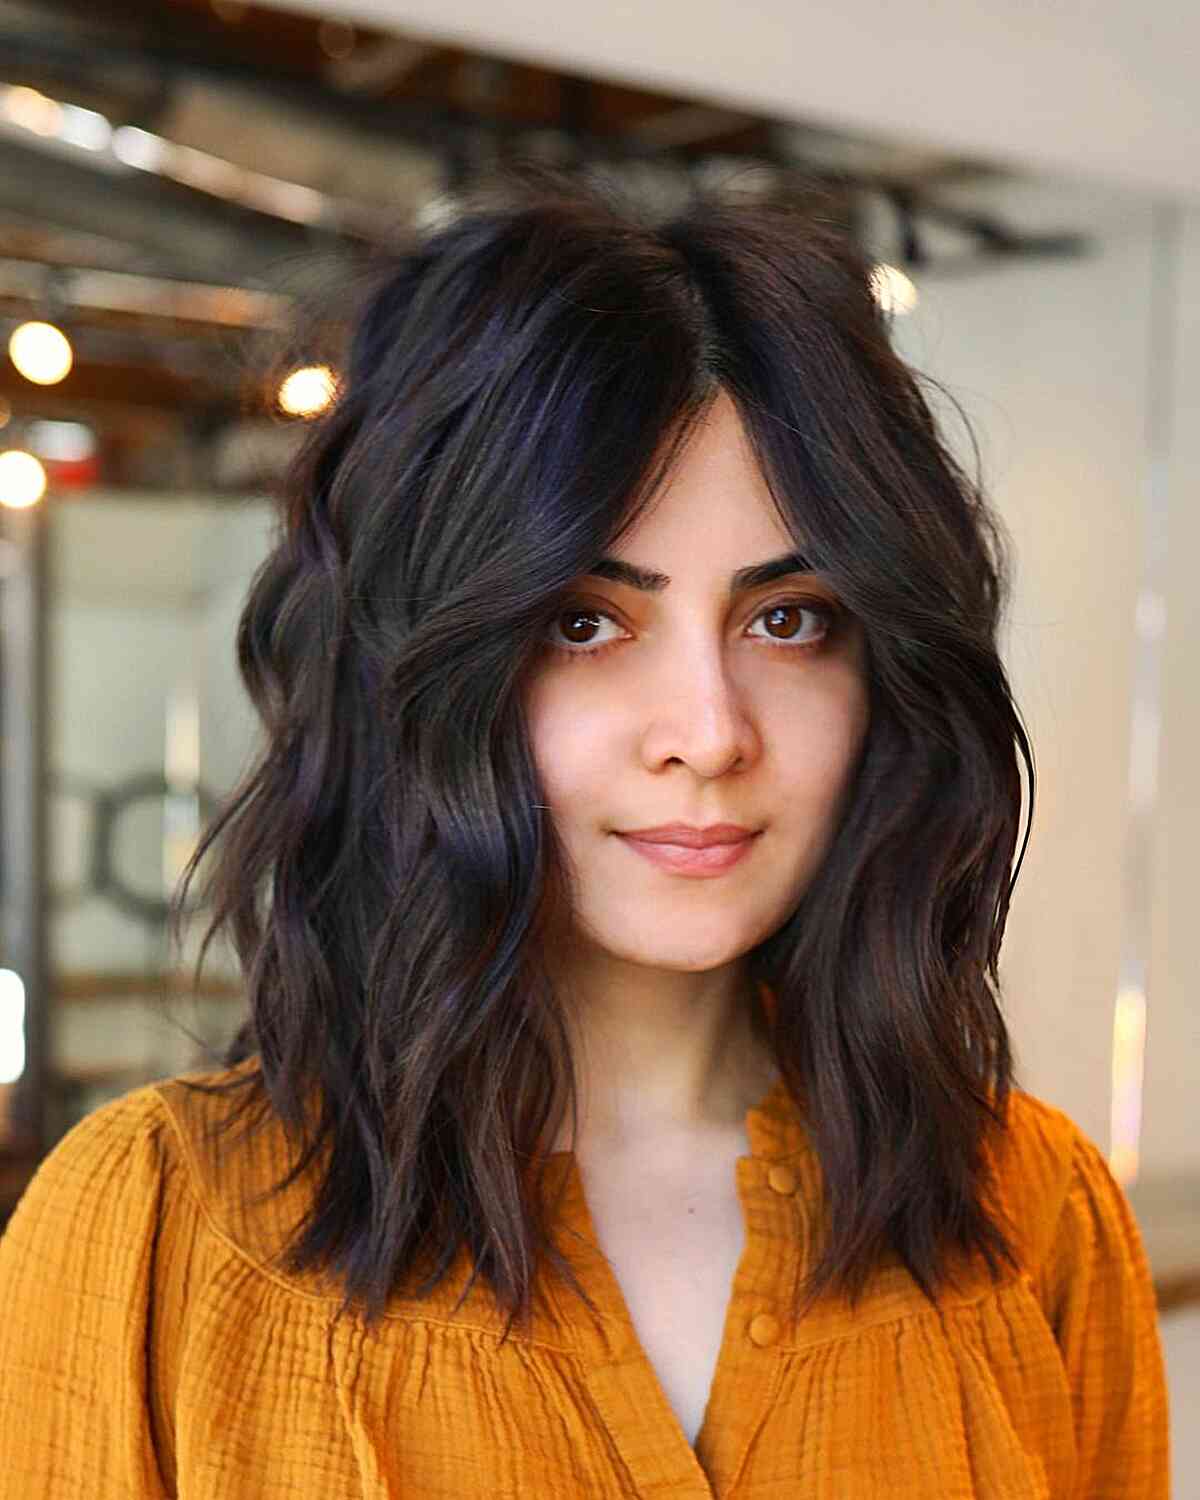 Messy Center-Parted Medium Cut for Collarbone-Length Hair with loose waves